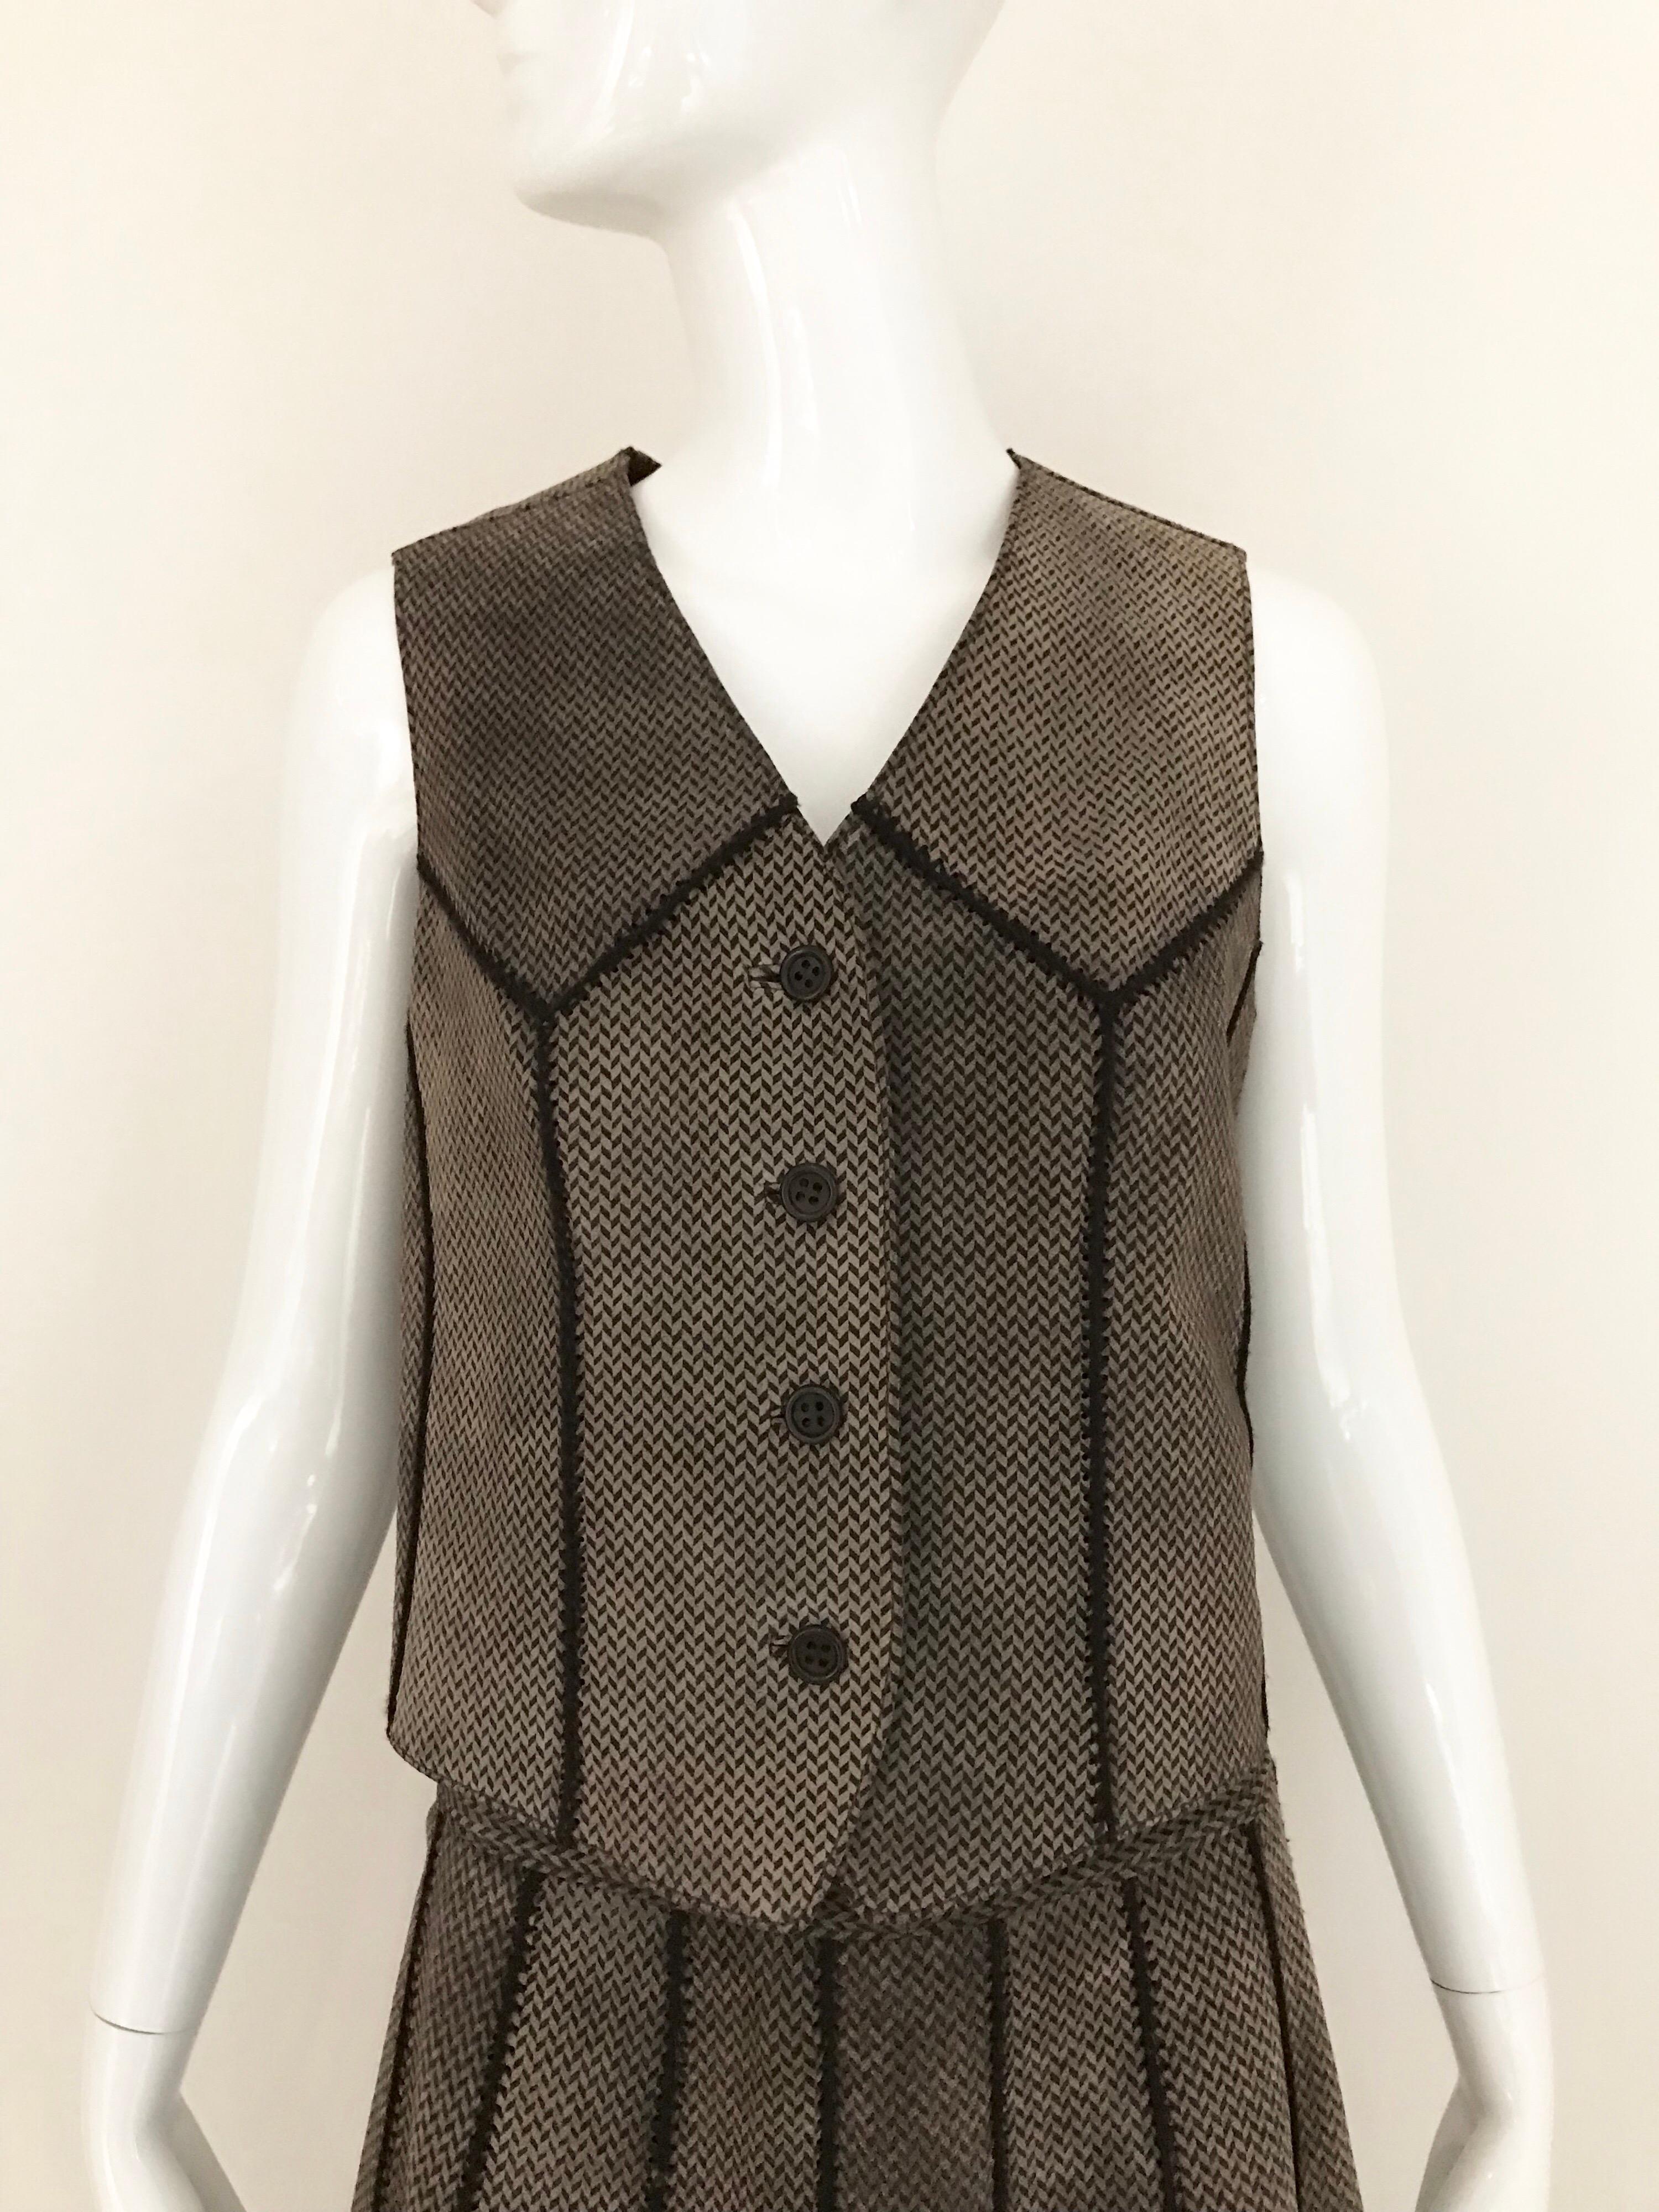 Chic 1970s Brown suede vest in chevron print. Vest and skirt lined in beautiful silk .
Size: Small US 6
Vest measurement : Bust: 34 inches/  Waist: 30 inches/ Vest length: 18.5 inches
Skirt: waist 28 inches/ Hip : 40 inches/ Skirt length: 27.5 inches